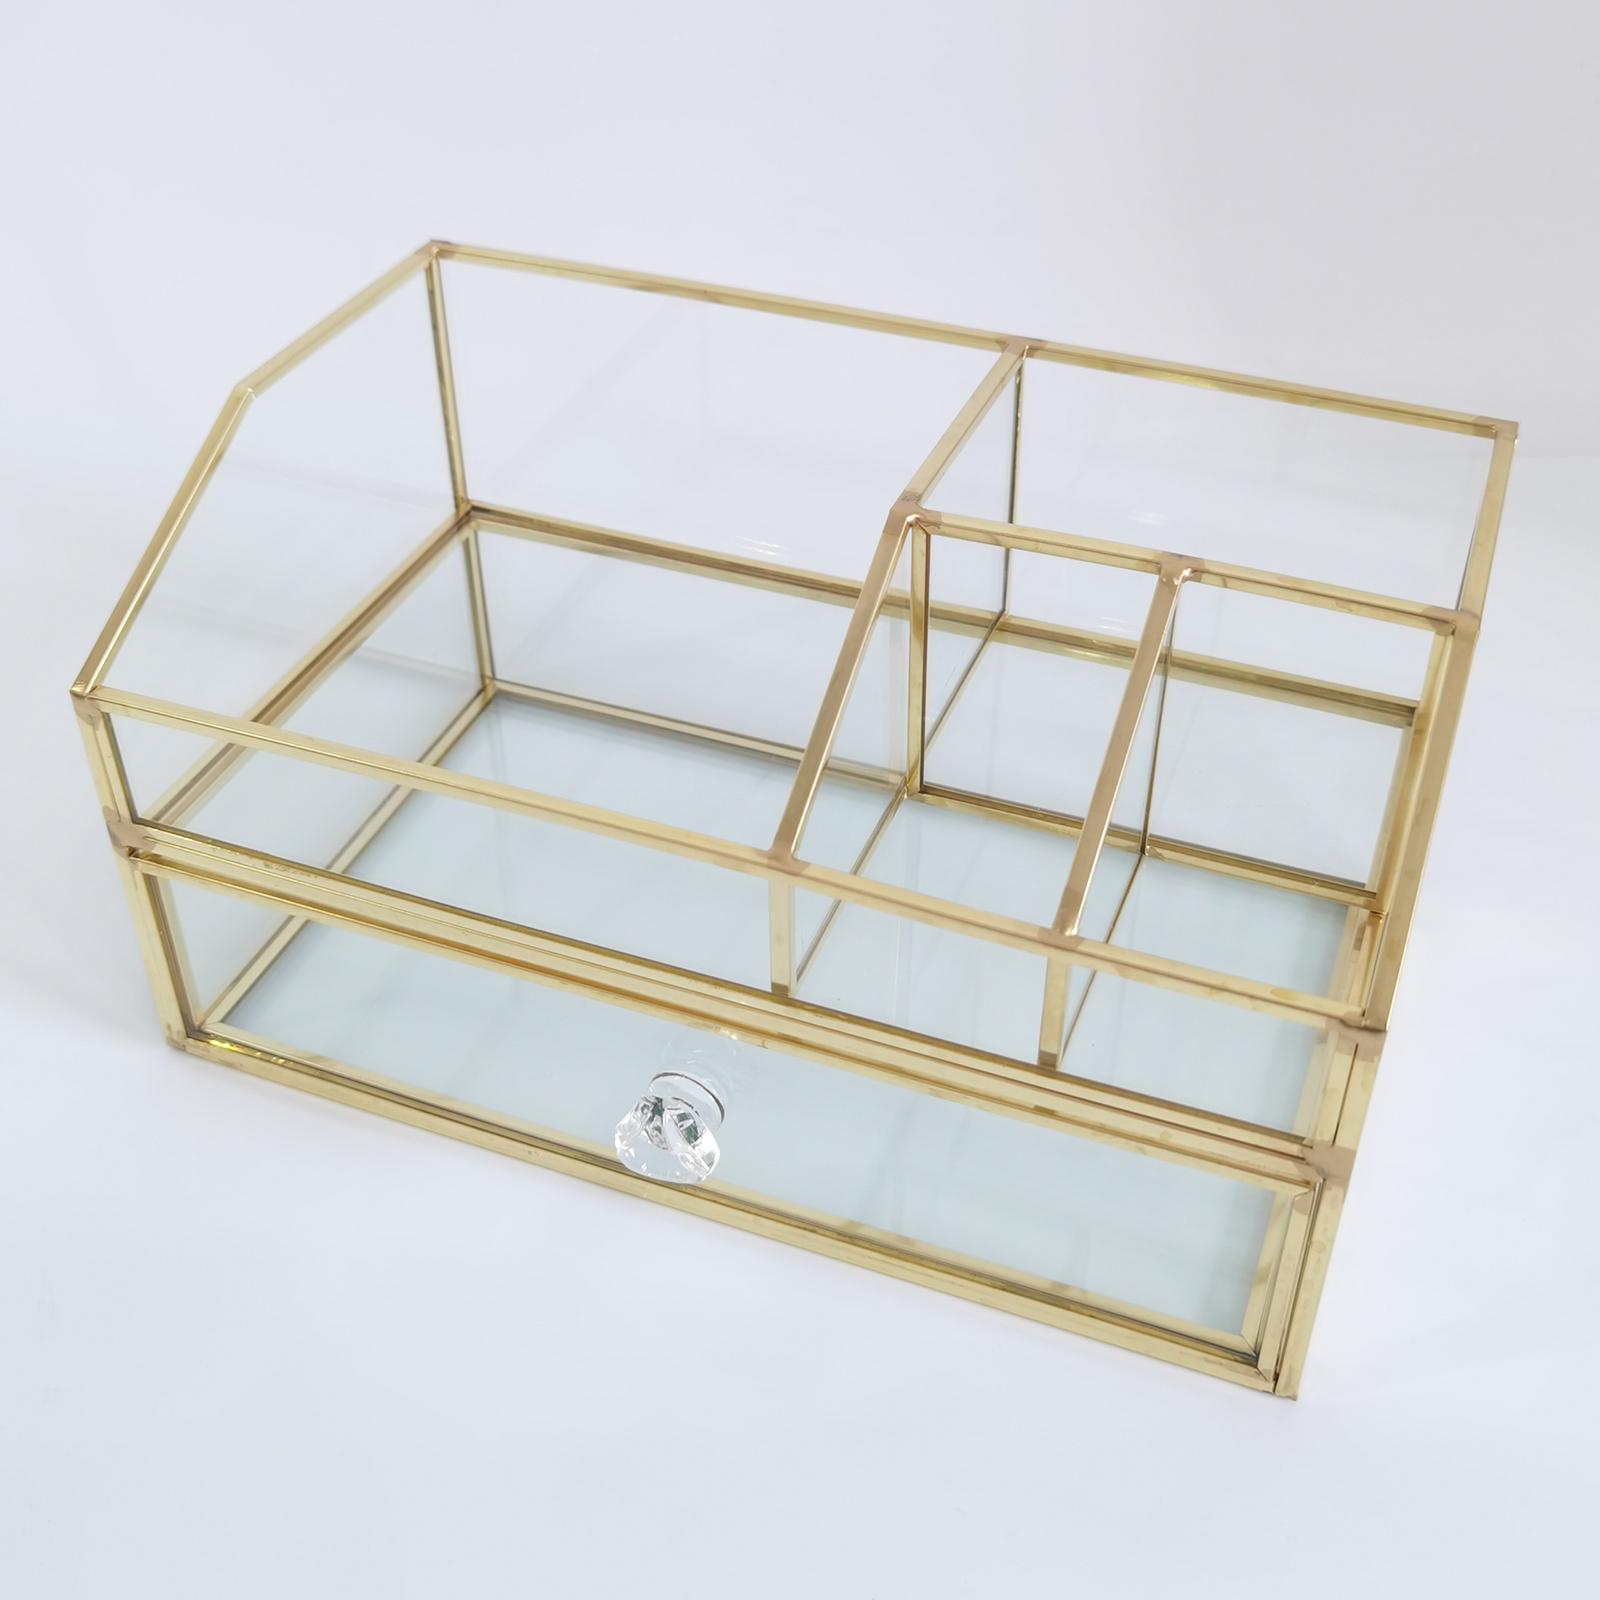 Clear Glass Jewelry Organizer Box - Golden Metal Keepsake Box Jewelry Organizer Holder, Wedding Birthday Gift, Vanity Decorative Case for Dresser